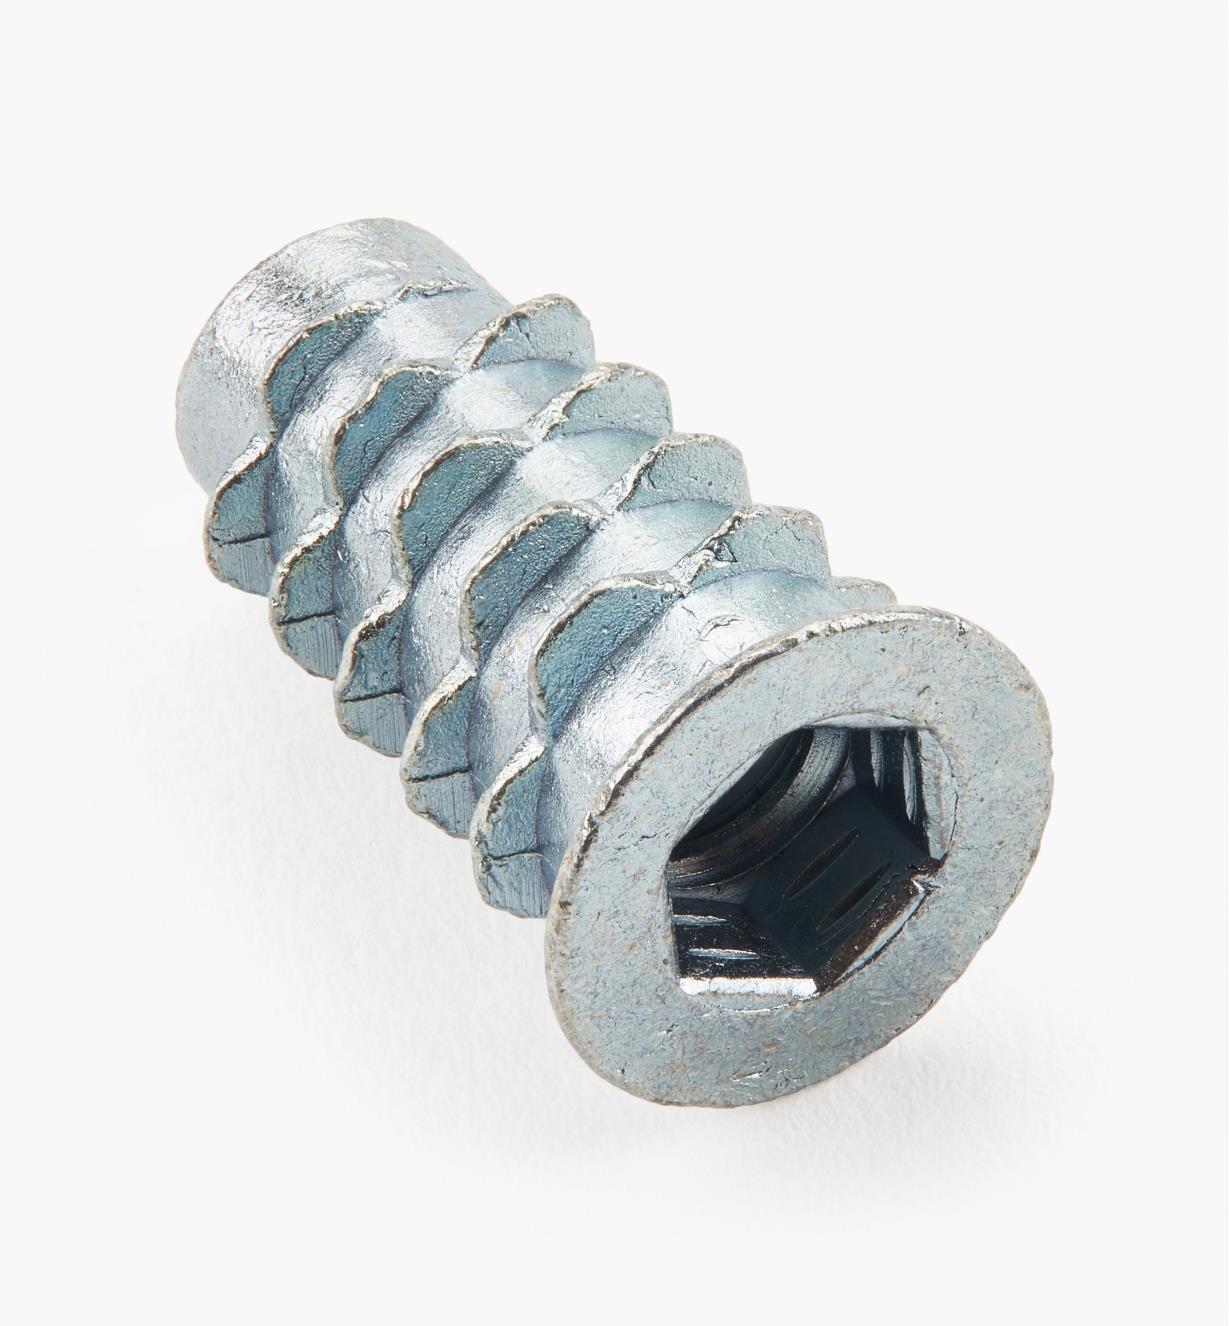 00N1020 - 20mm Flanged Nut, 1/4 20 Quick-Connect